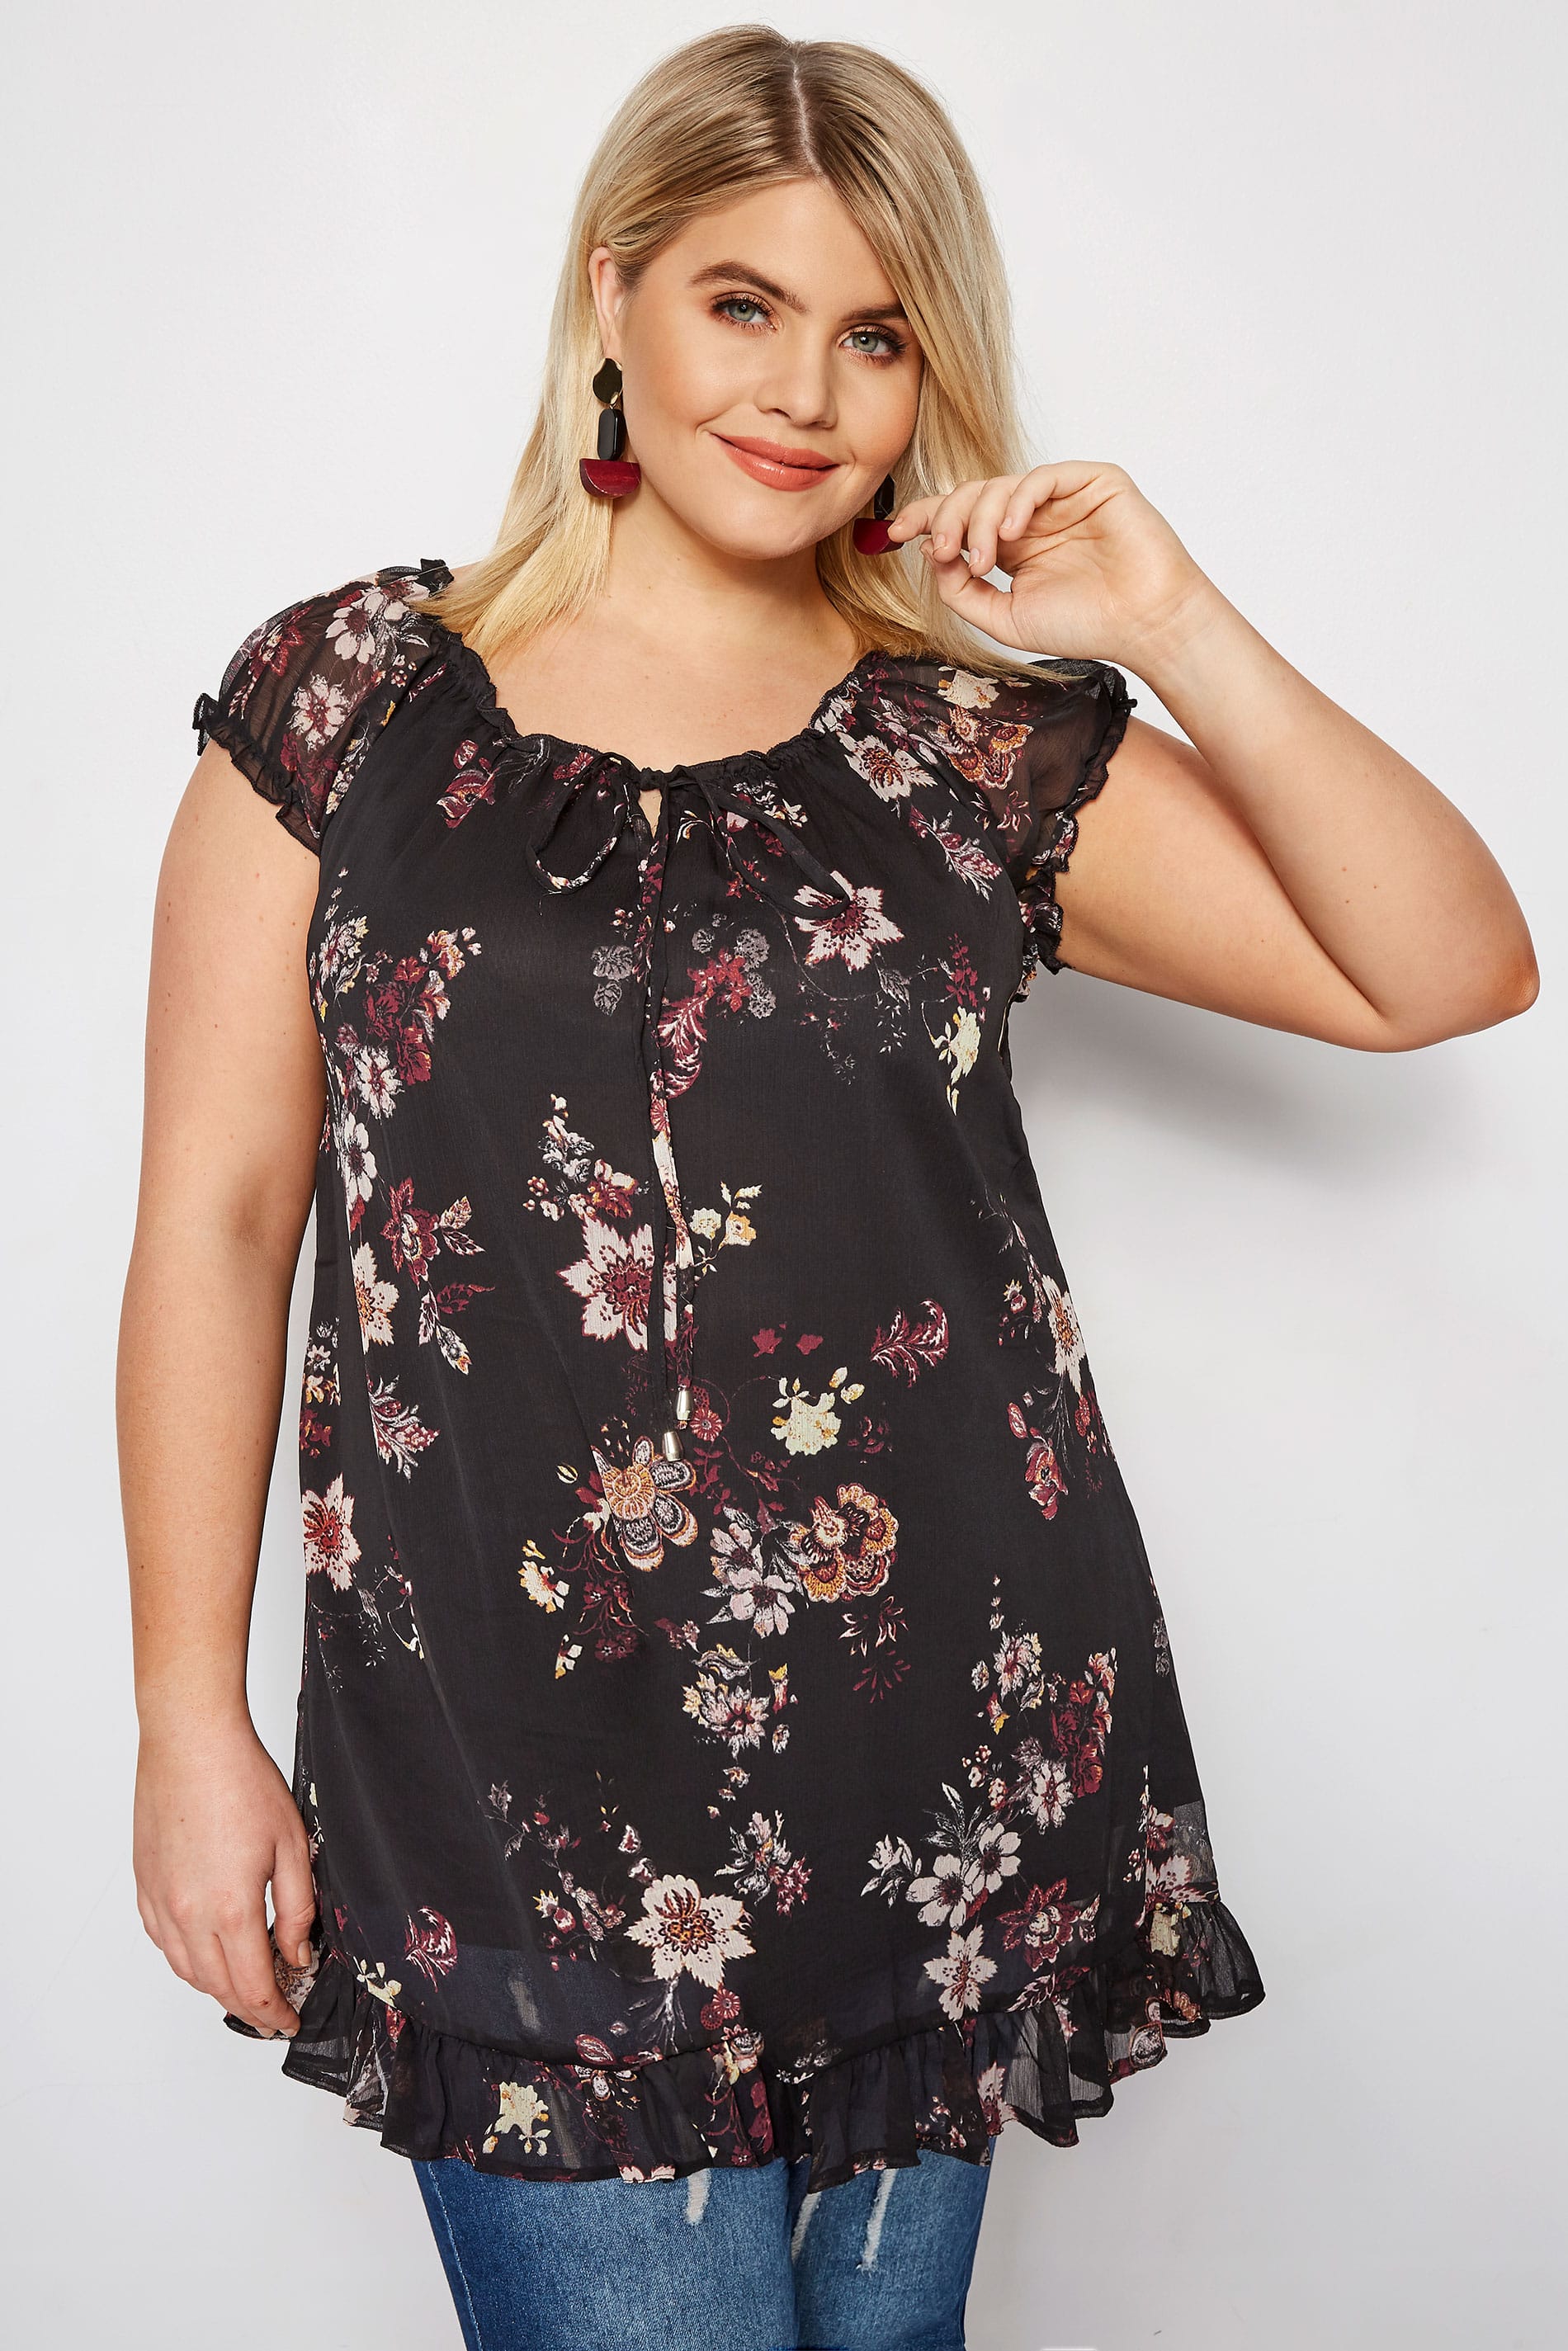 Black Floral Gypsy Top, Plus size 16 to 32